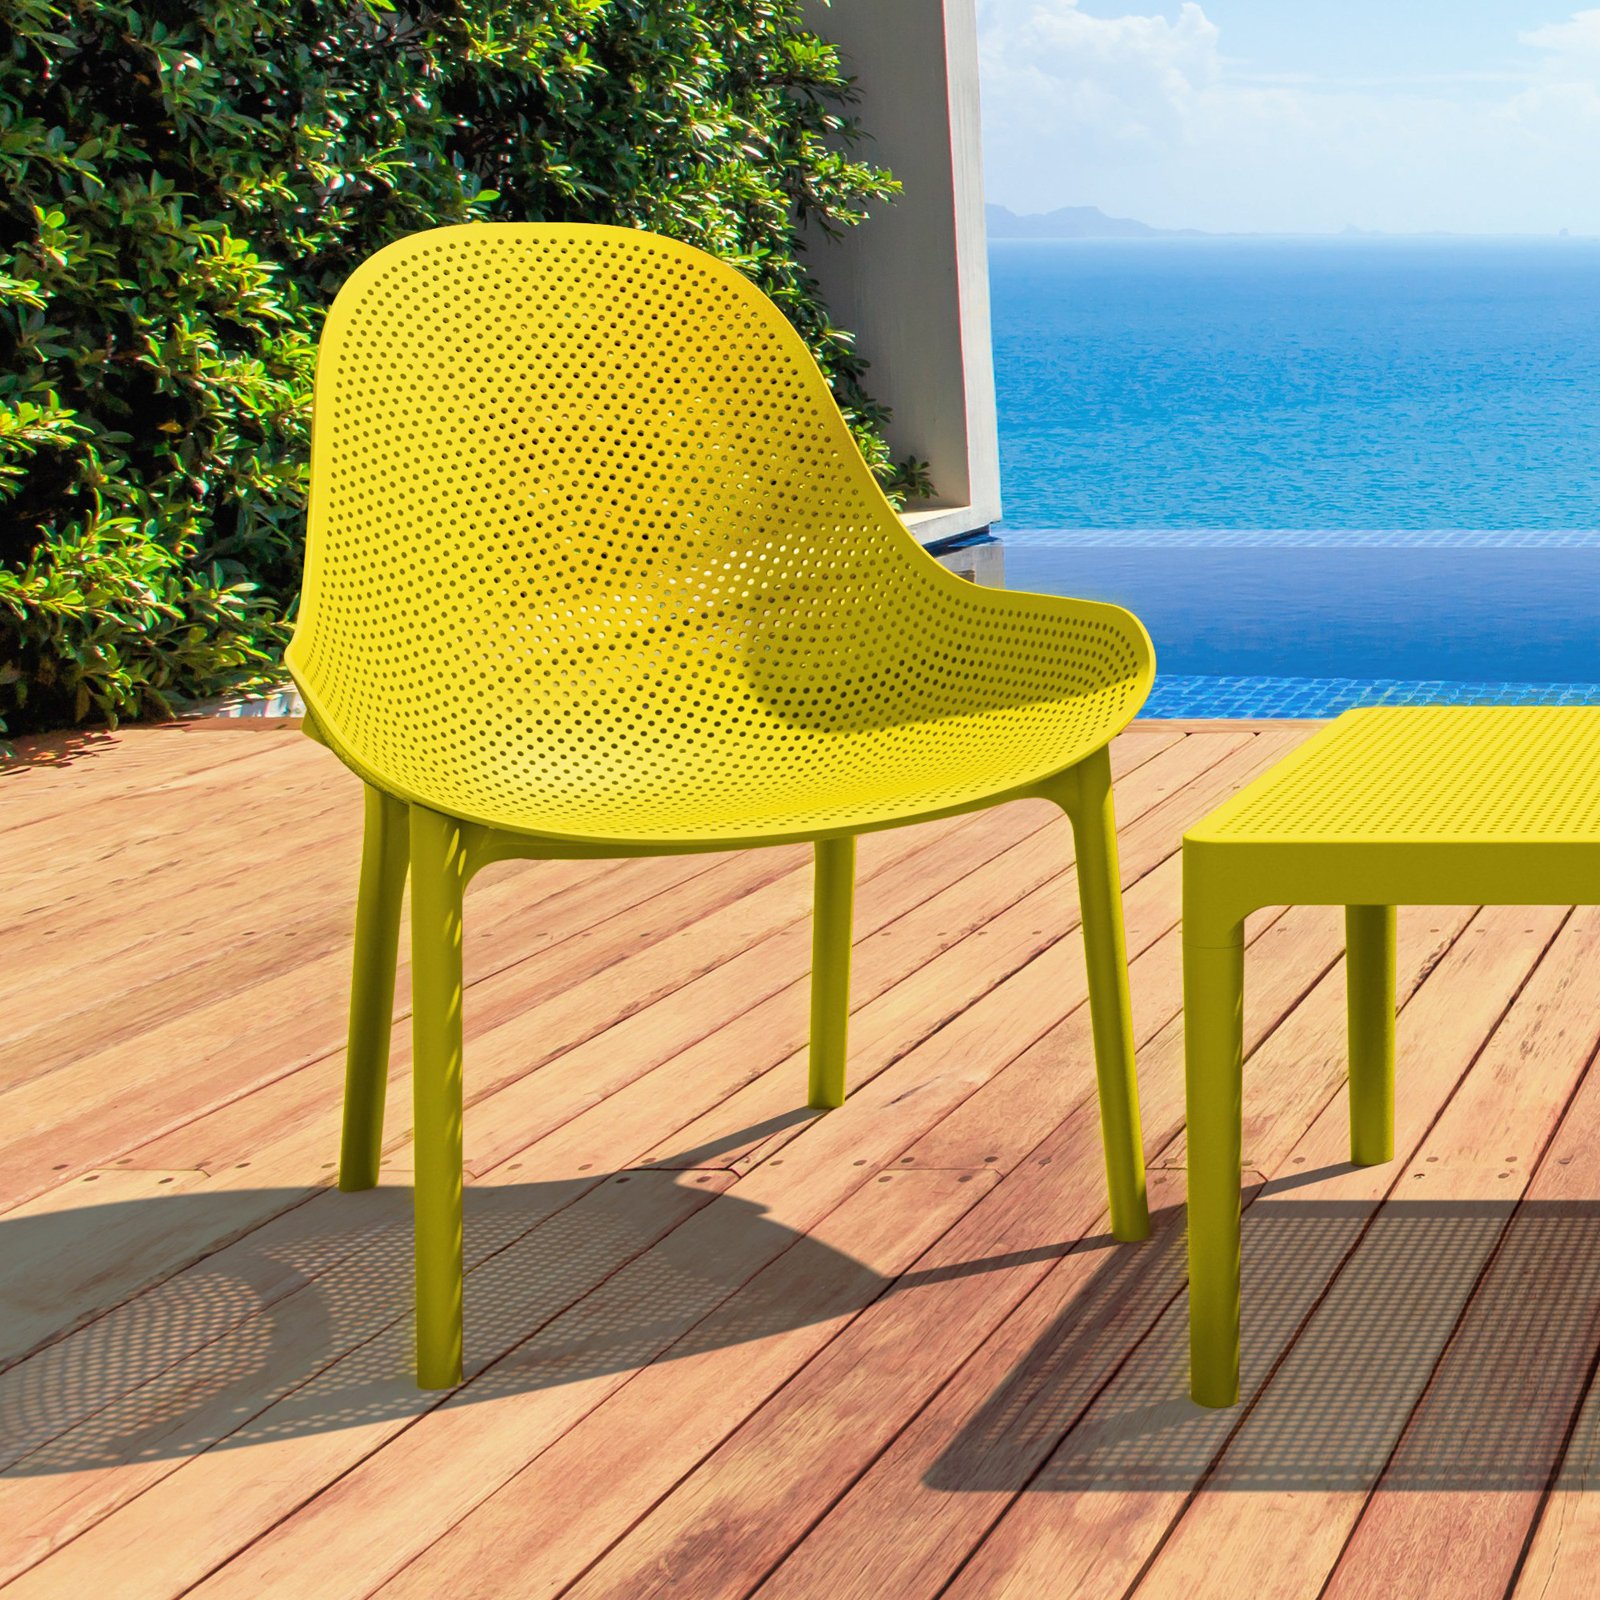 Compamia Sky Patio Chair in Taupe - image 3 of 11